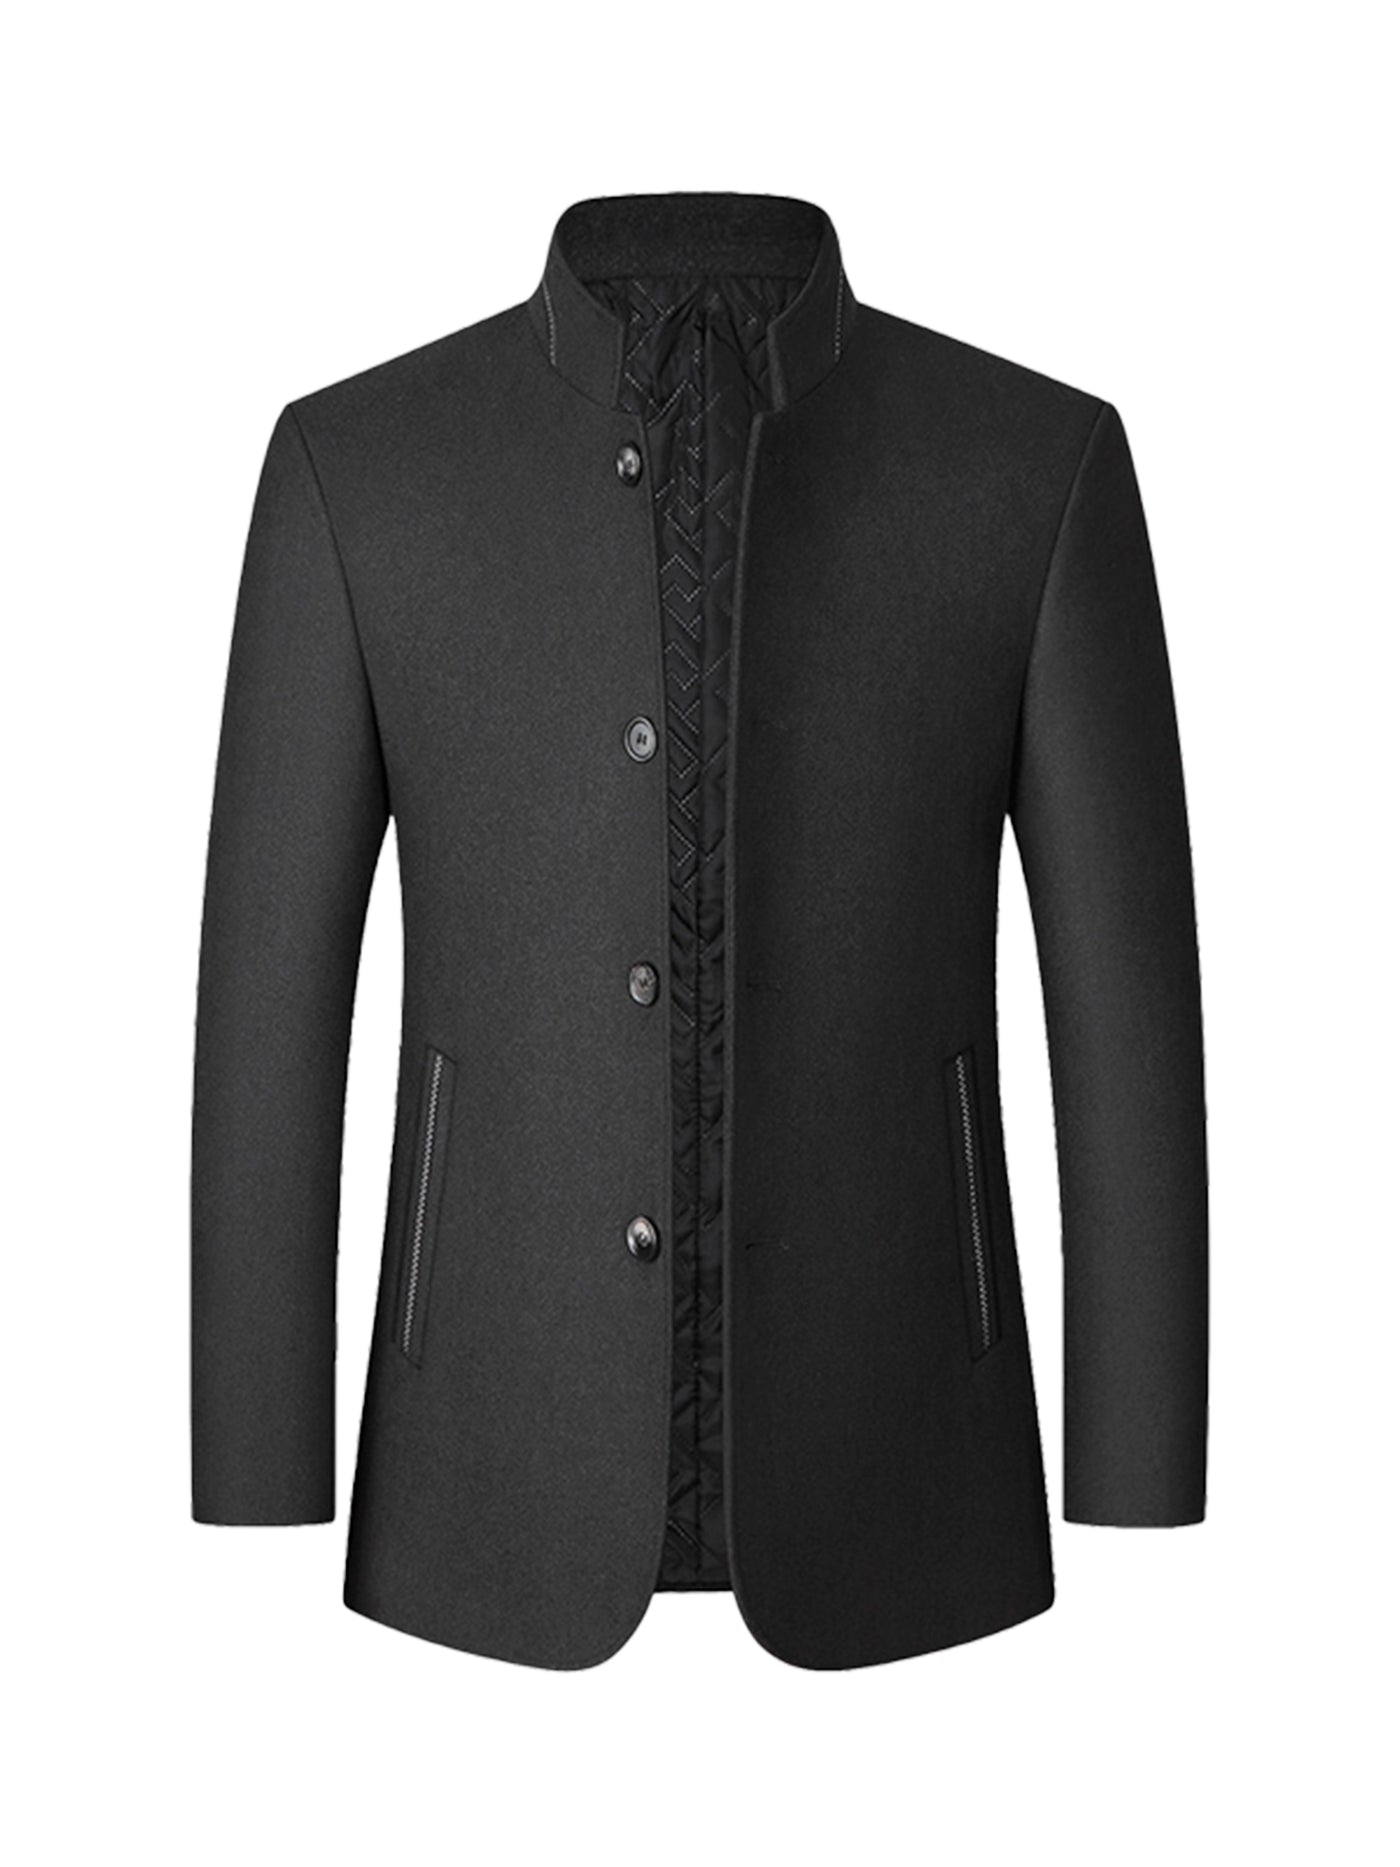 Bublédon Winter Coats for Men's Stand Collar Single Breasted Mid-Length Overcoats